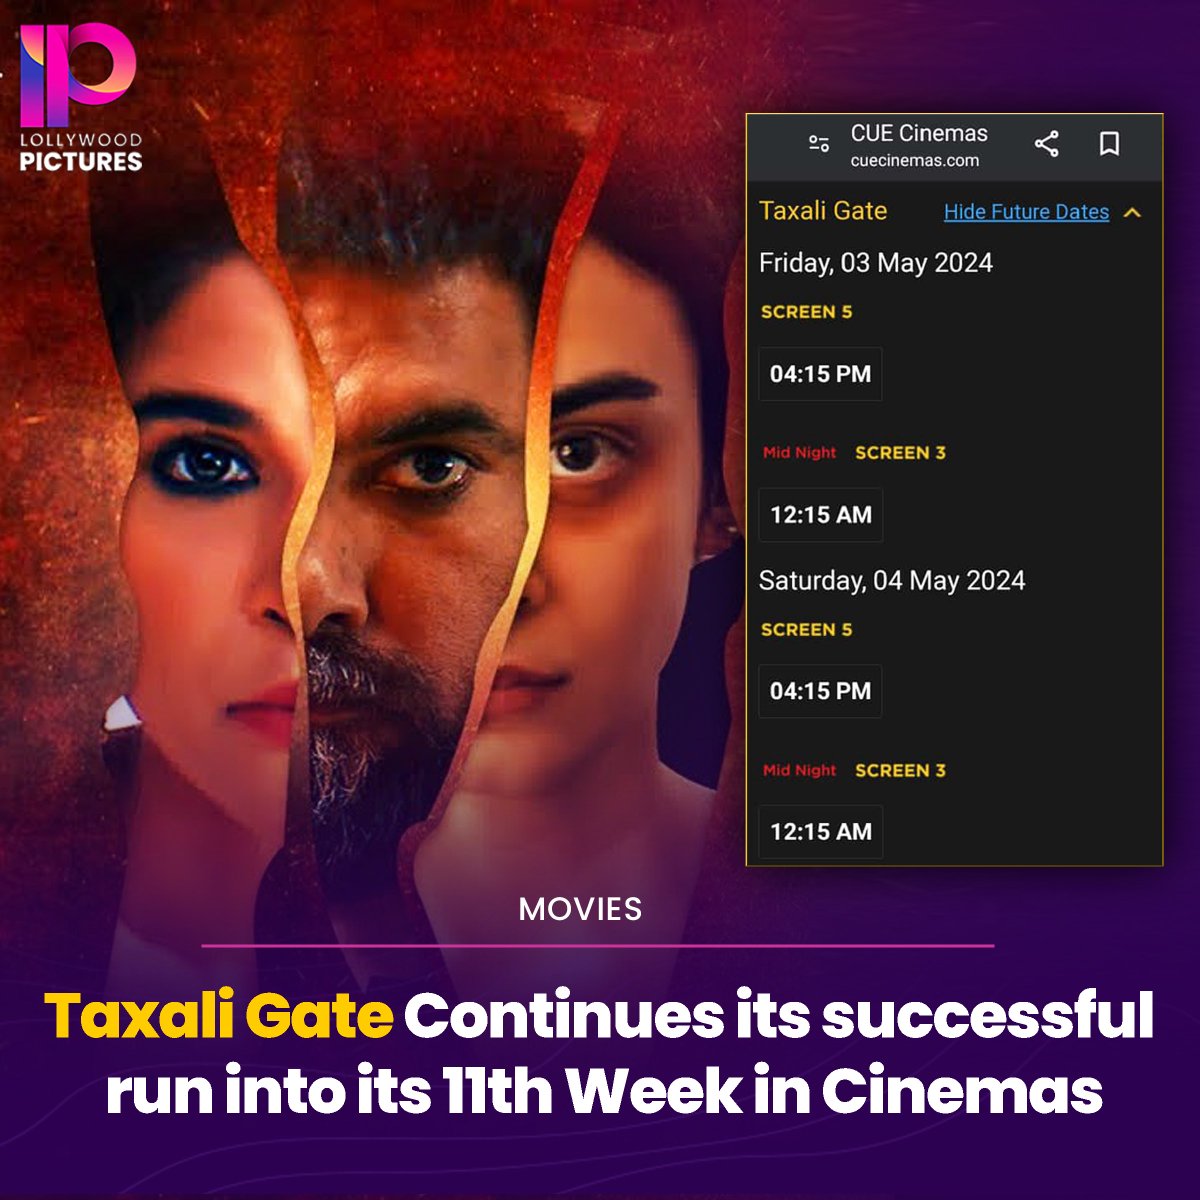 #TaxaliGate, released Feb 16, is still strong in Pak Cinemas at 11th week. Despite competition from Hollywood, Indian Punjabi, local releases, & Eid Ul Fitr rush in 2024, it persevered. Current BO gross is 4.5 Cr+, poised for the international market with UAE, KSA, USA releases.